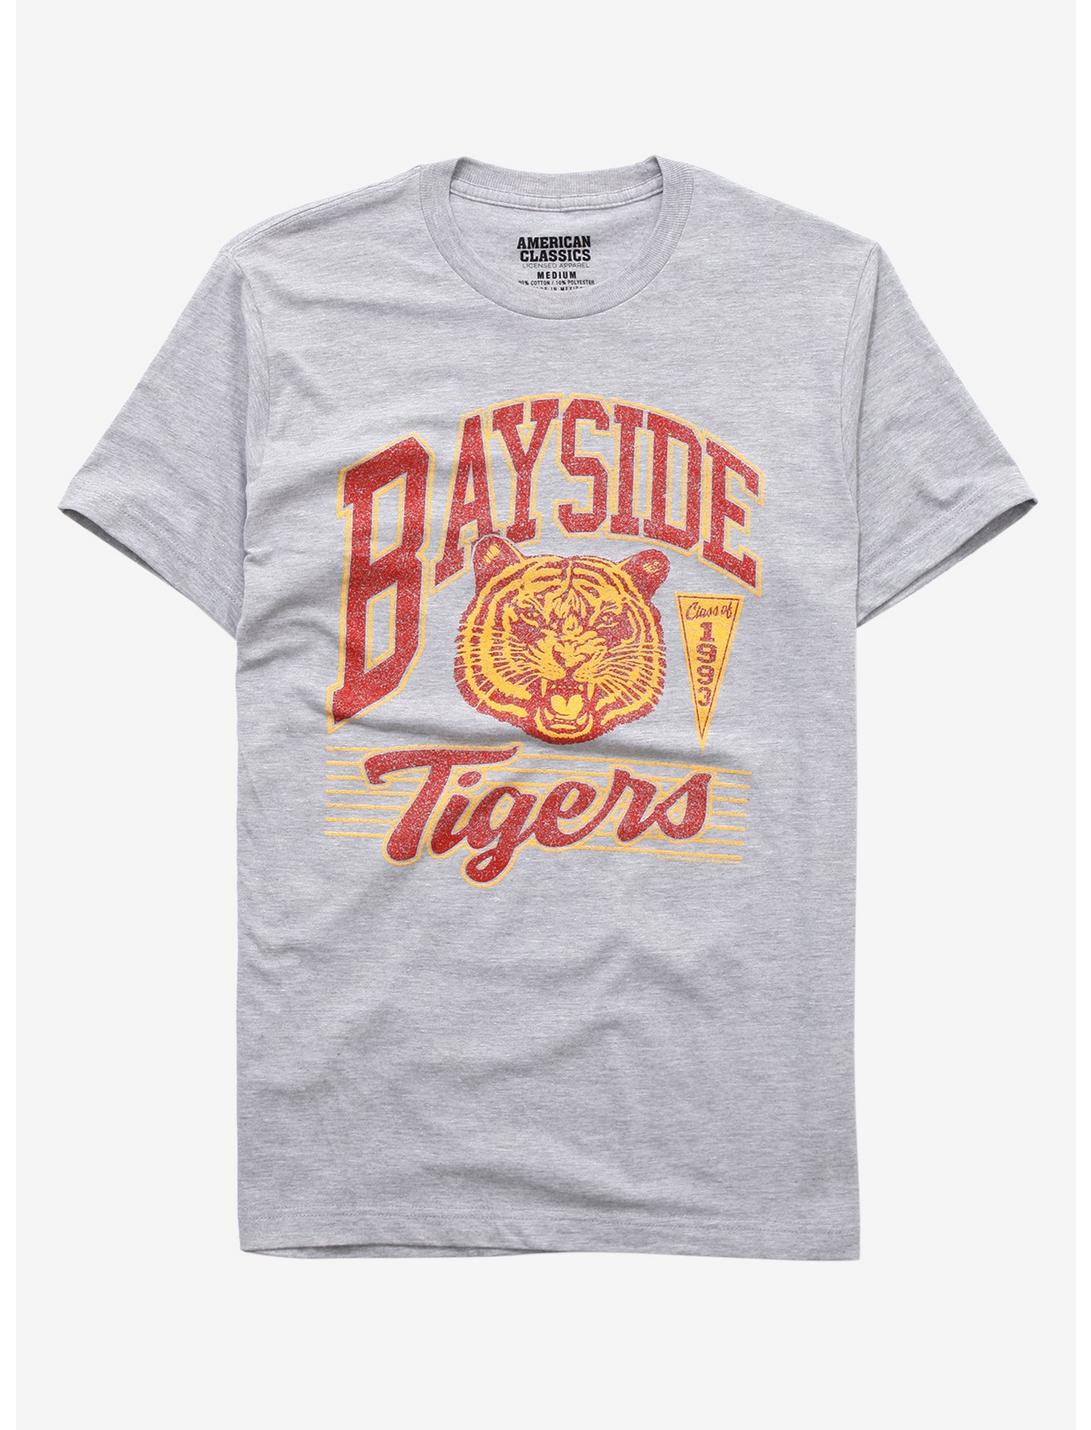 Saved By The Bell Bayside Tigers T-Shirt, HEATHER, hi-res